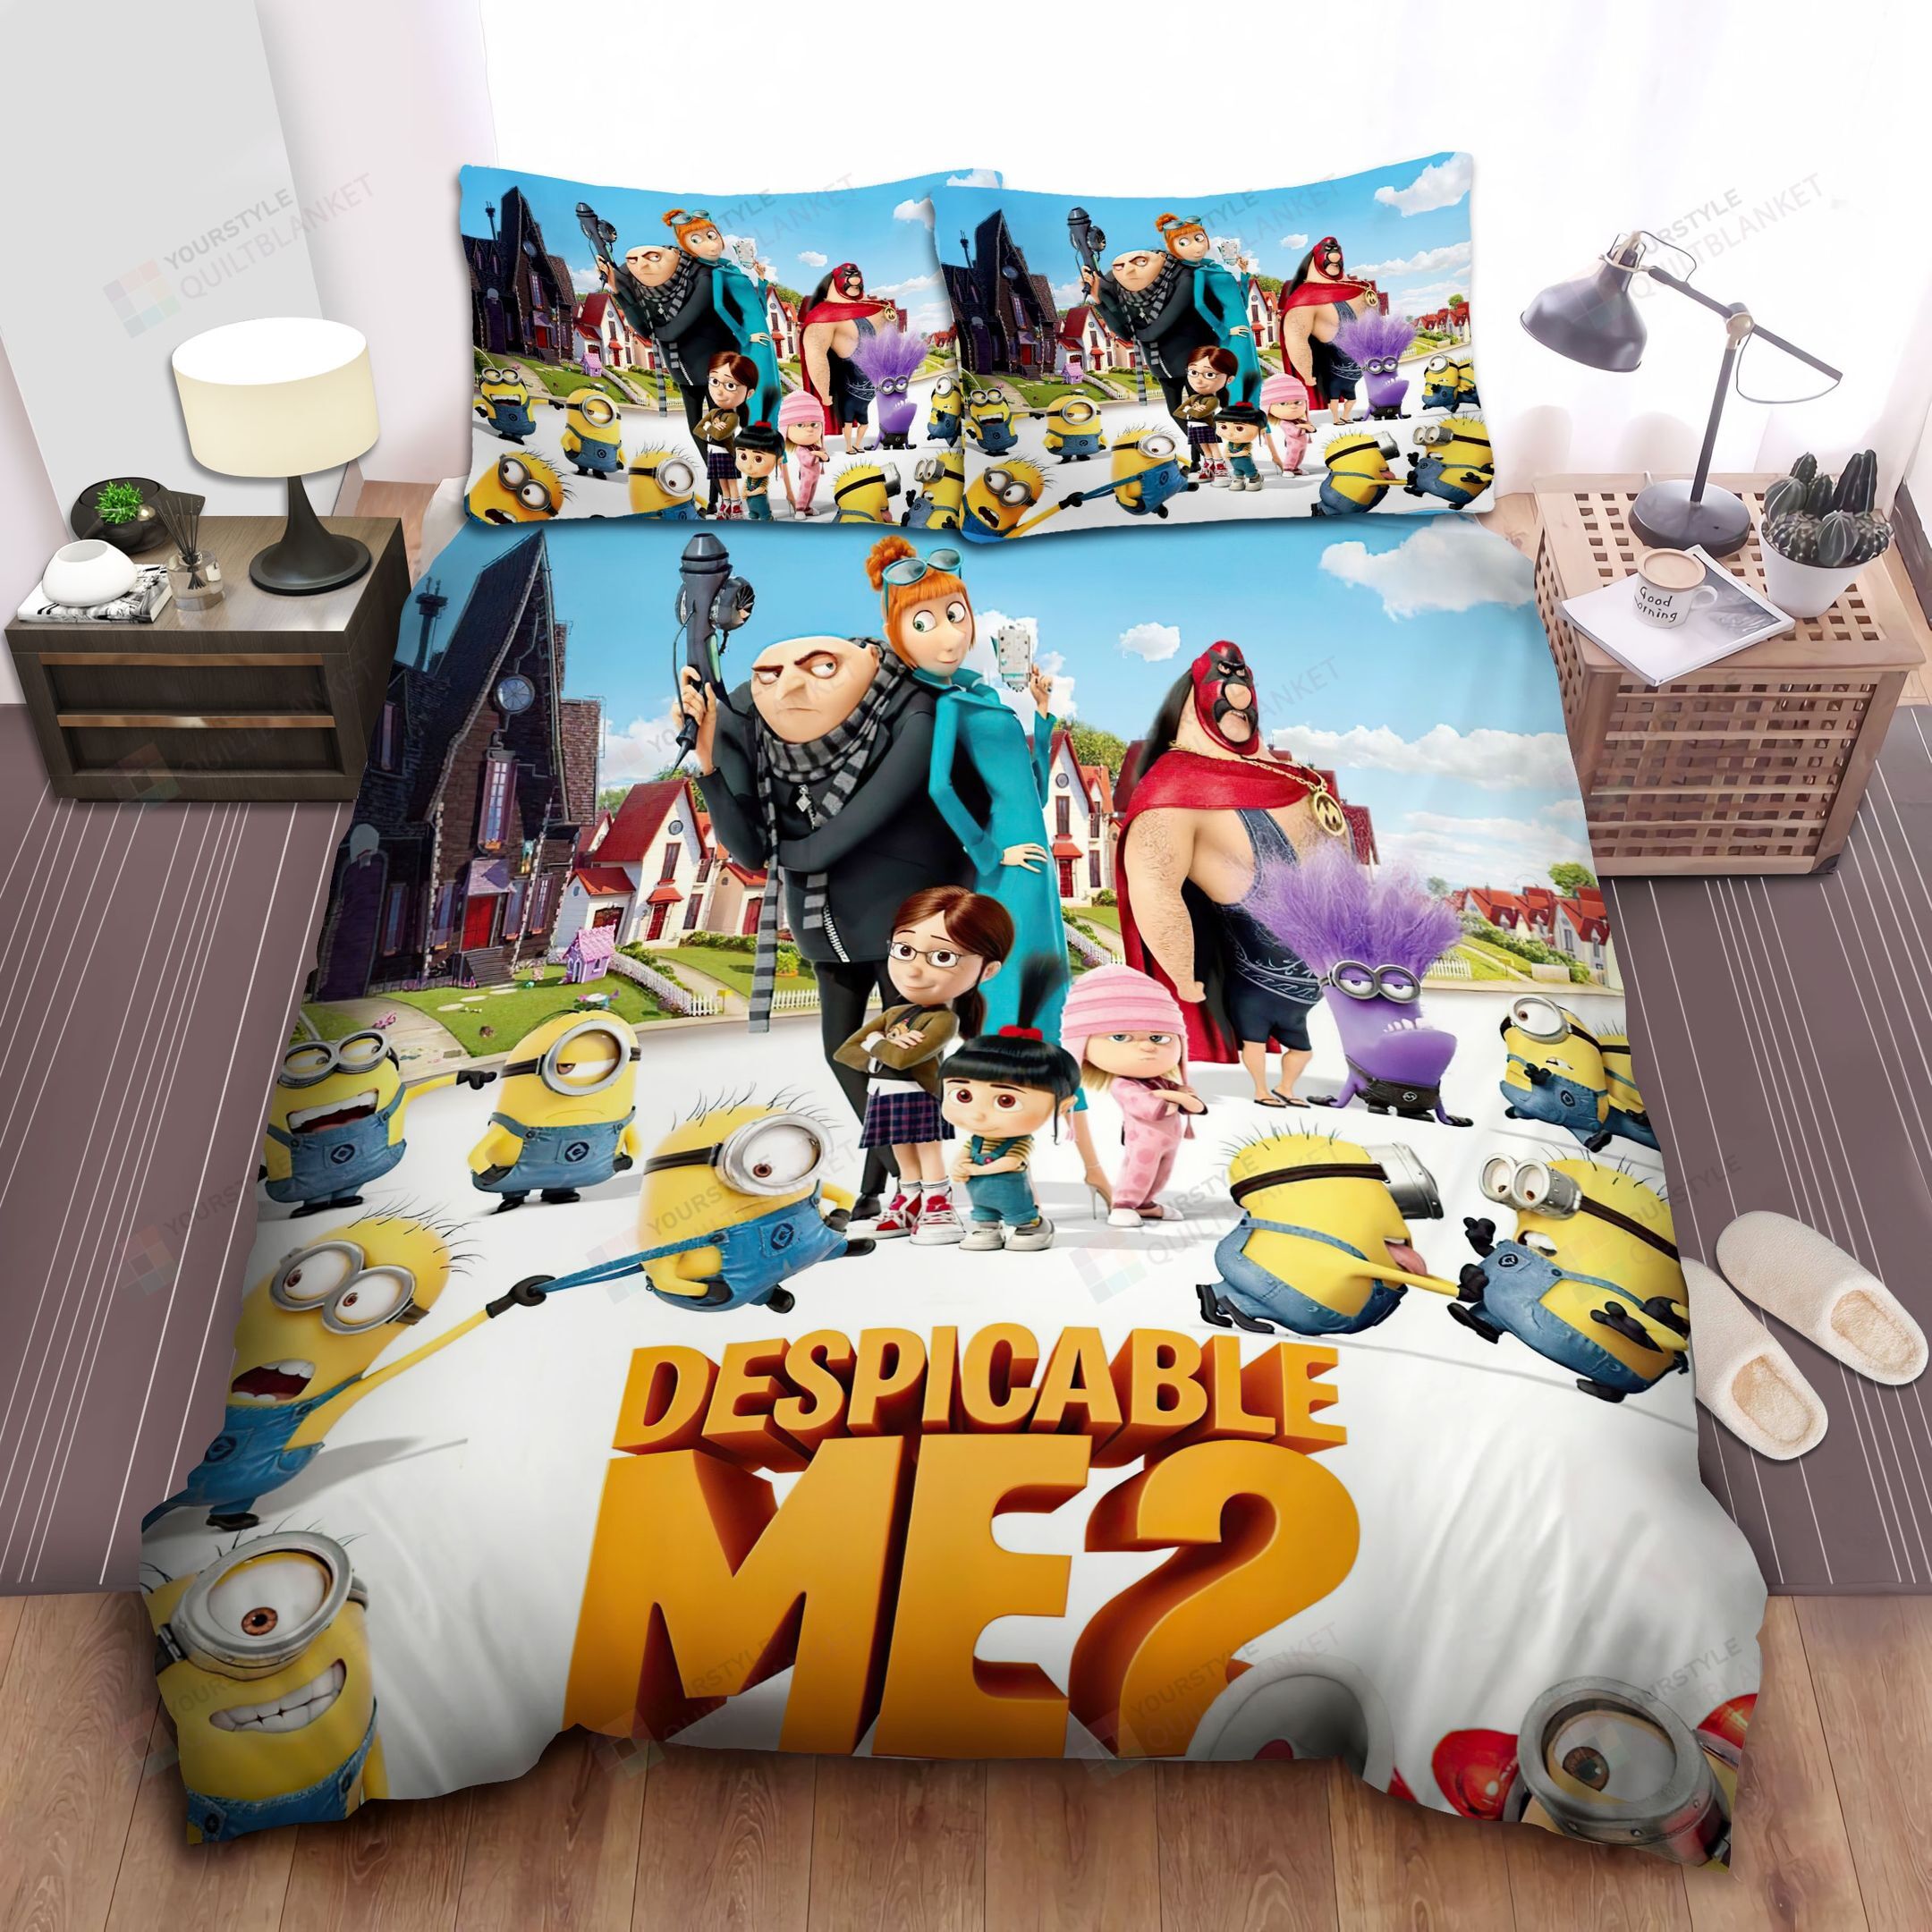 Minion In Despicable Me, The 2nd Part Wallpaper  Bed Sheets Spread Comforter Duvet Cover Bedding Sets